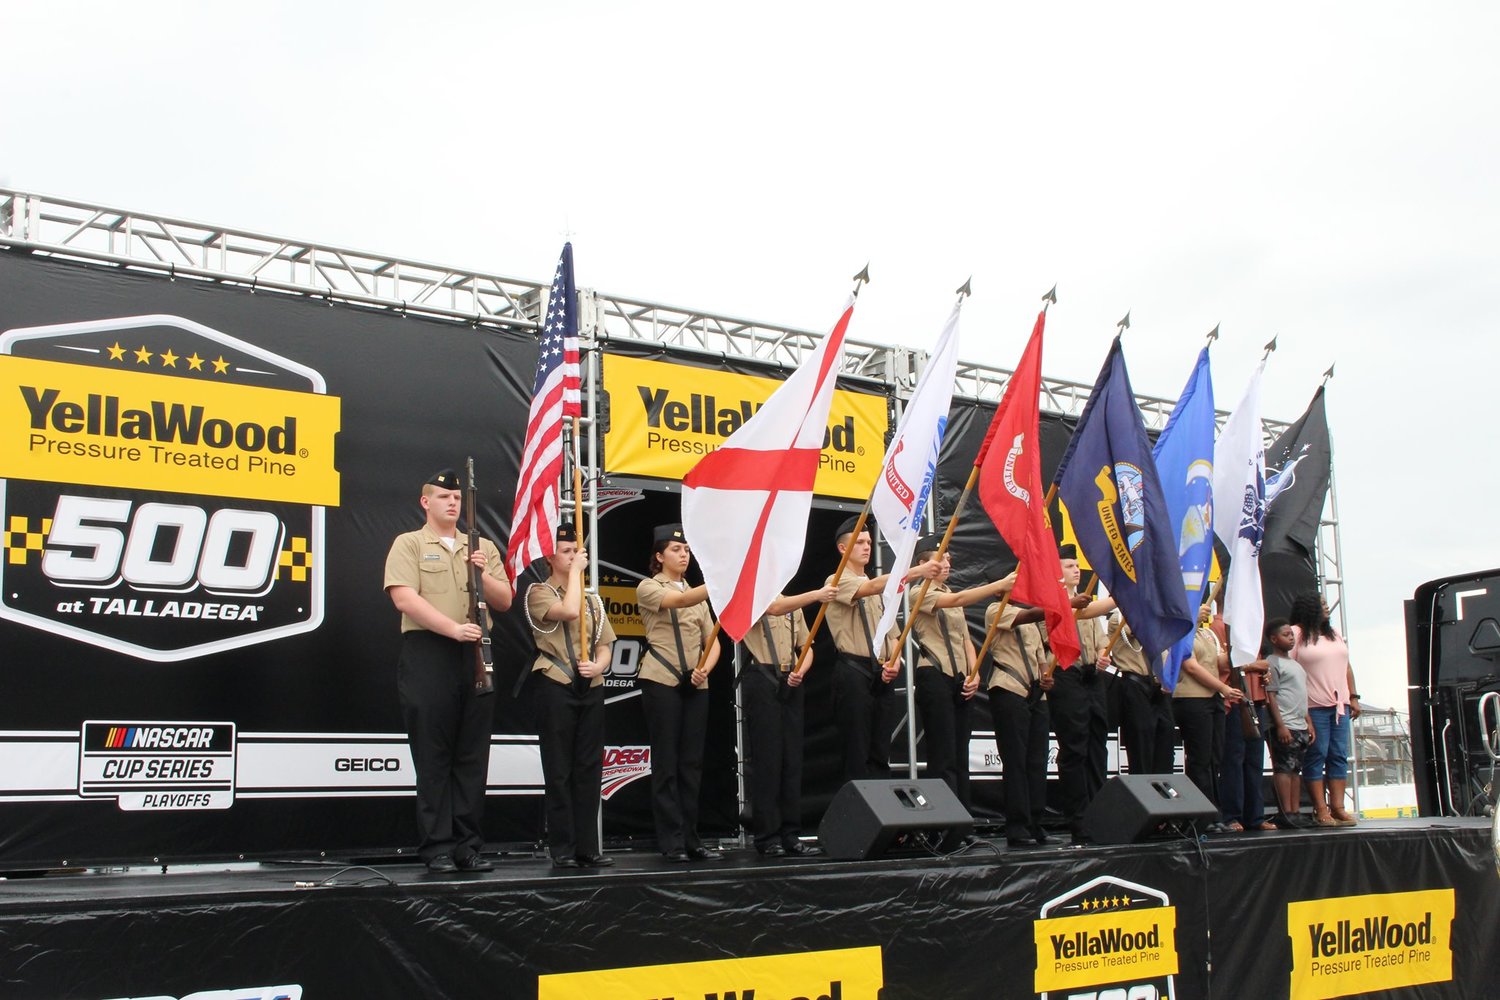 The RHS NJROTC cadets presented Colors during the 2021 YellaWood 500 at Talladega Superspeedway. The unit will once again present Colors at this year’s race on Sunday, Oct. 2.